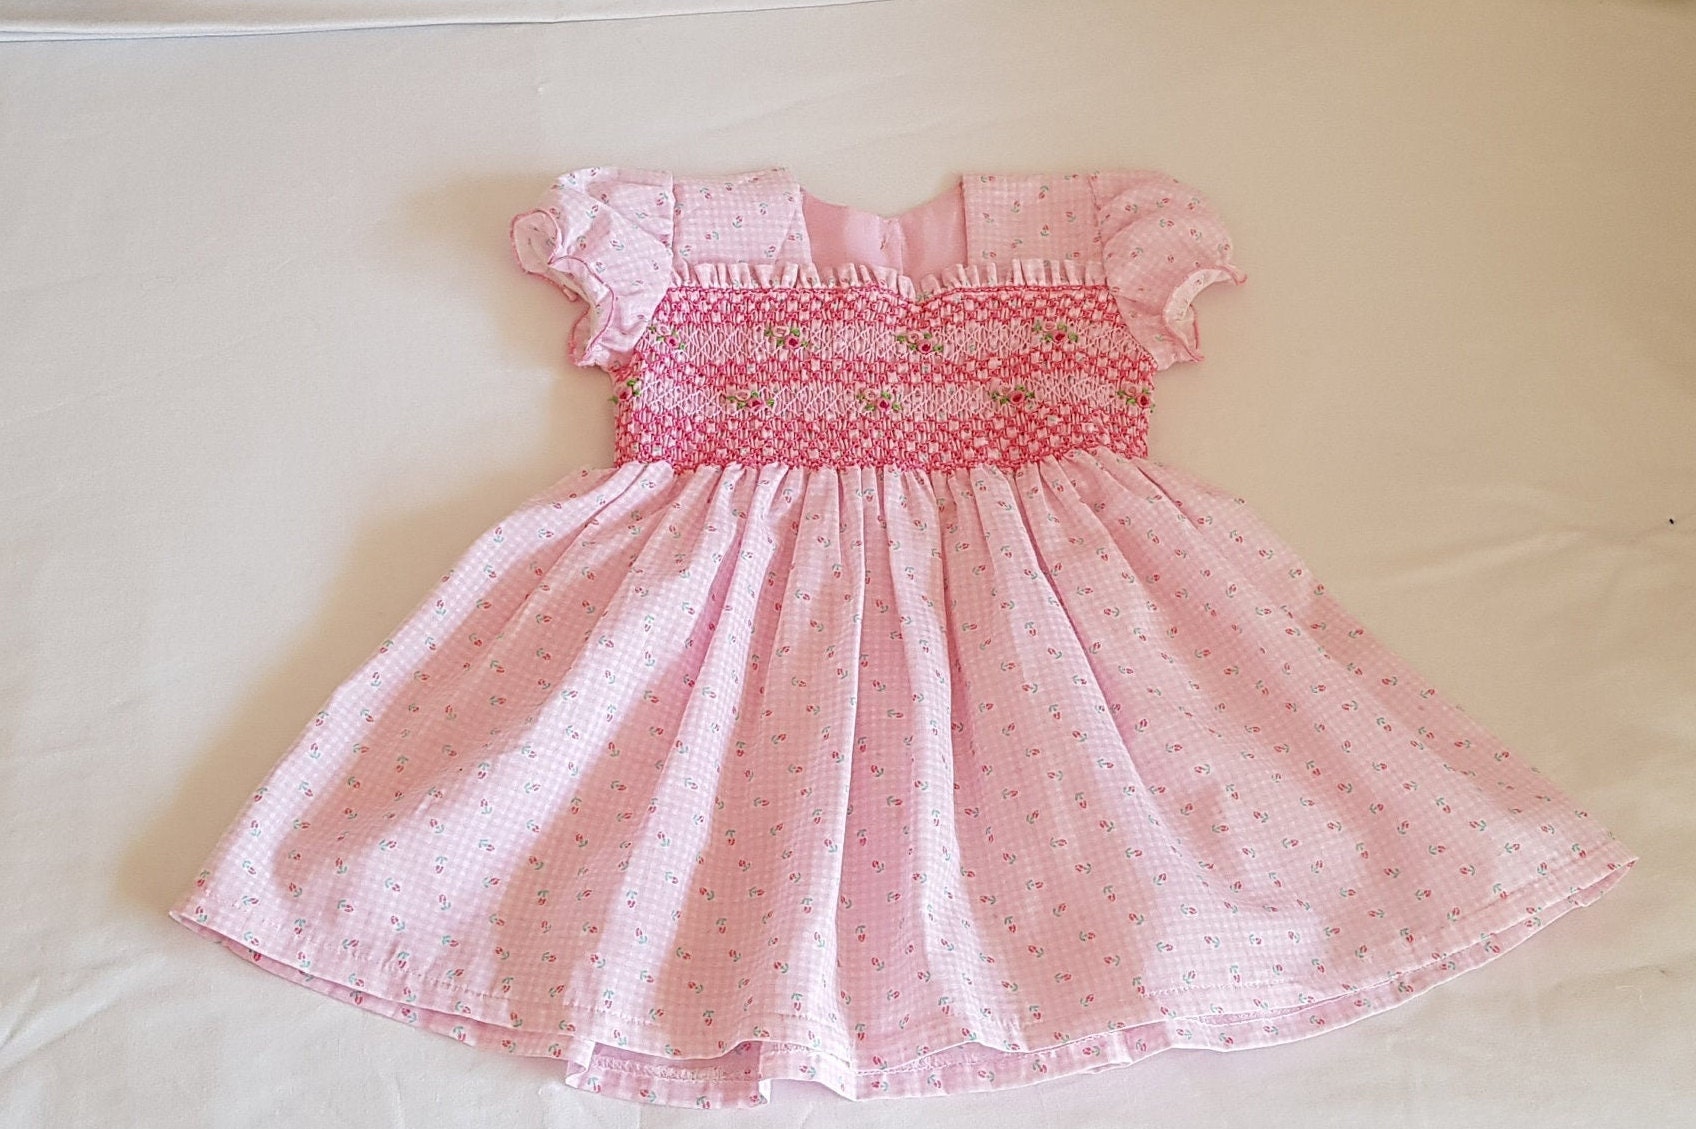 Handmade smocked baby dress with hand embroidered roses | Etsy